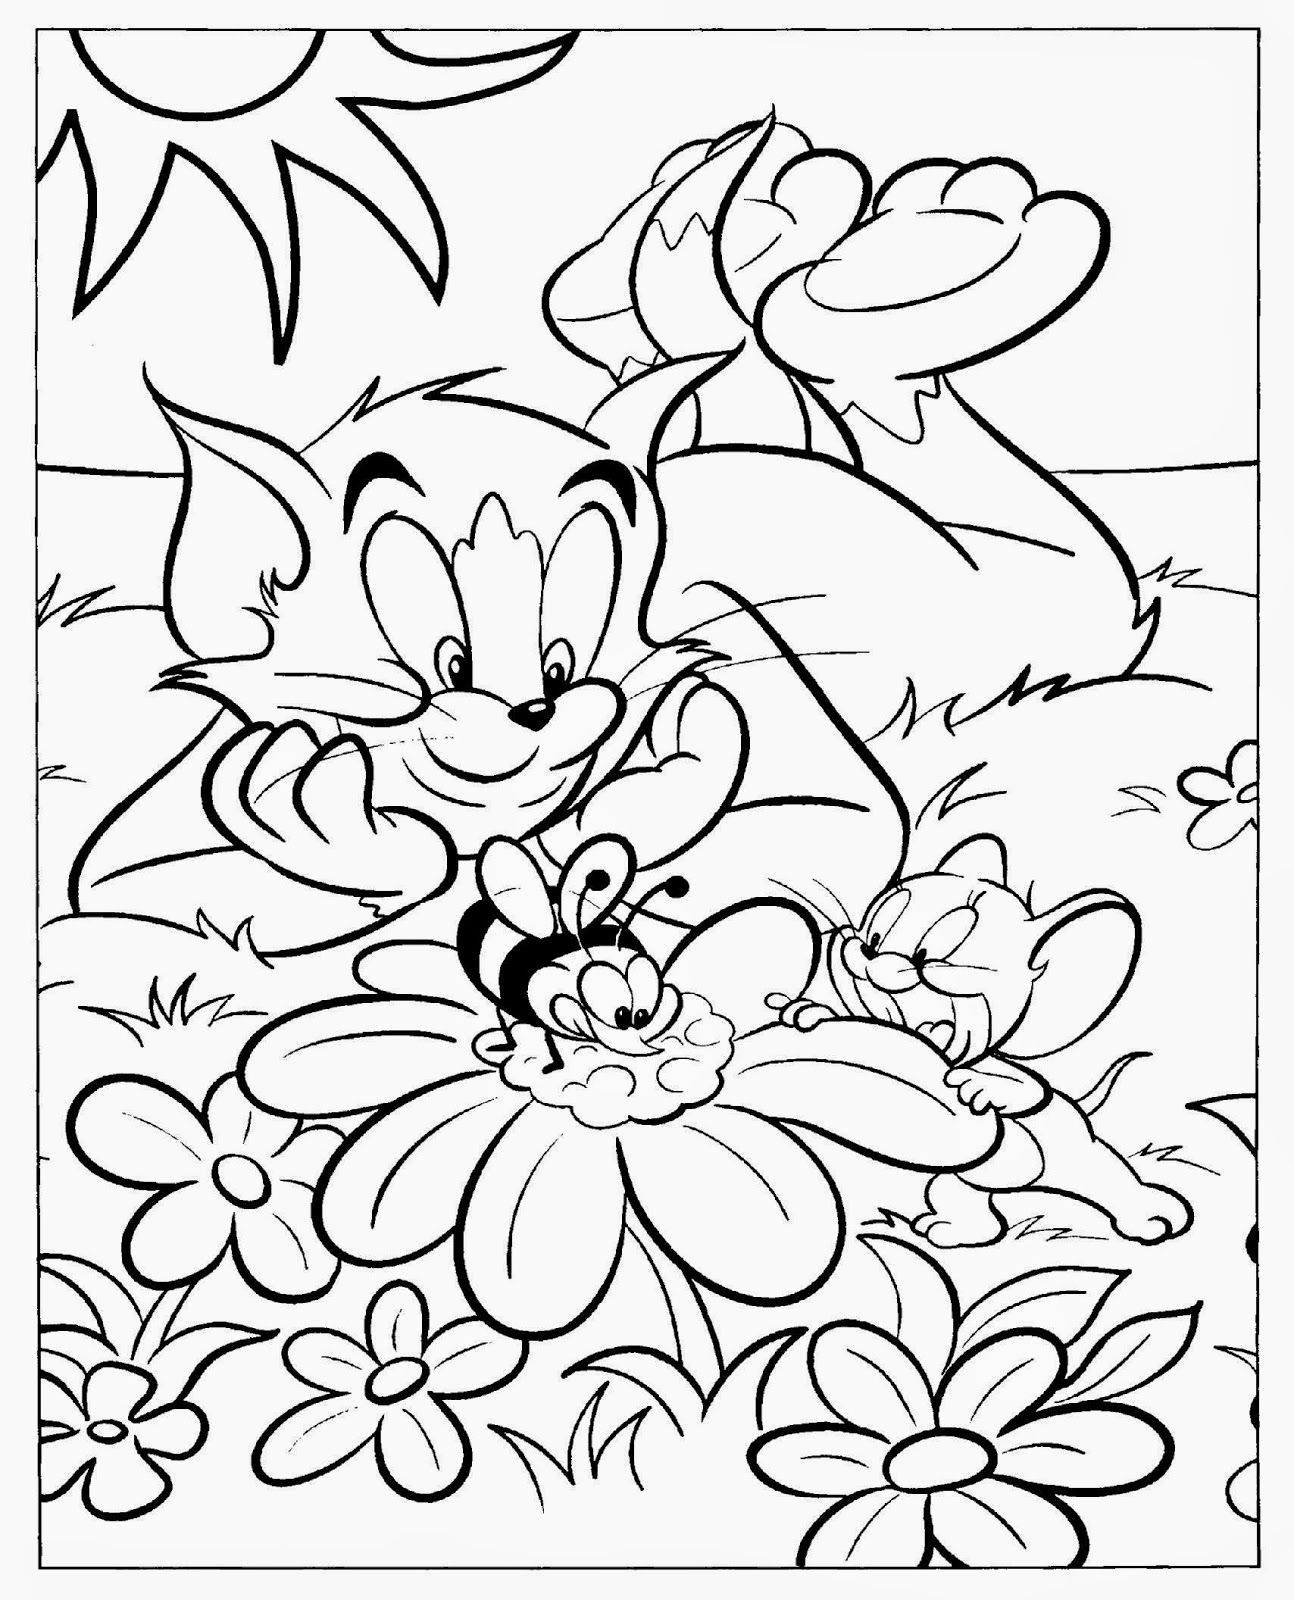 Cartoon Coloring Pages | Free Coloring Sheet